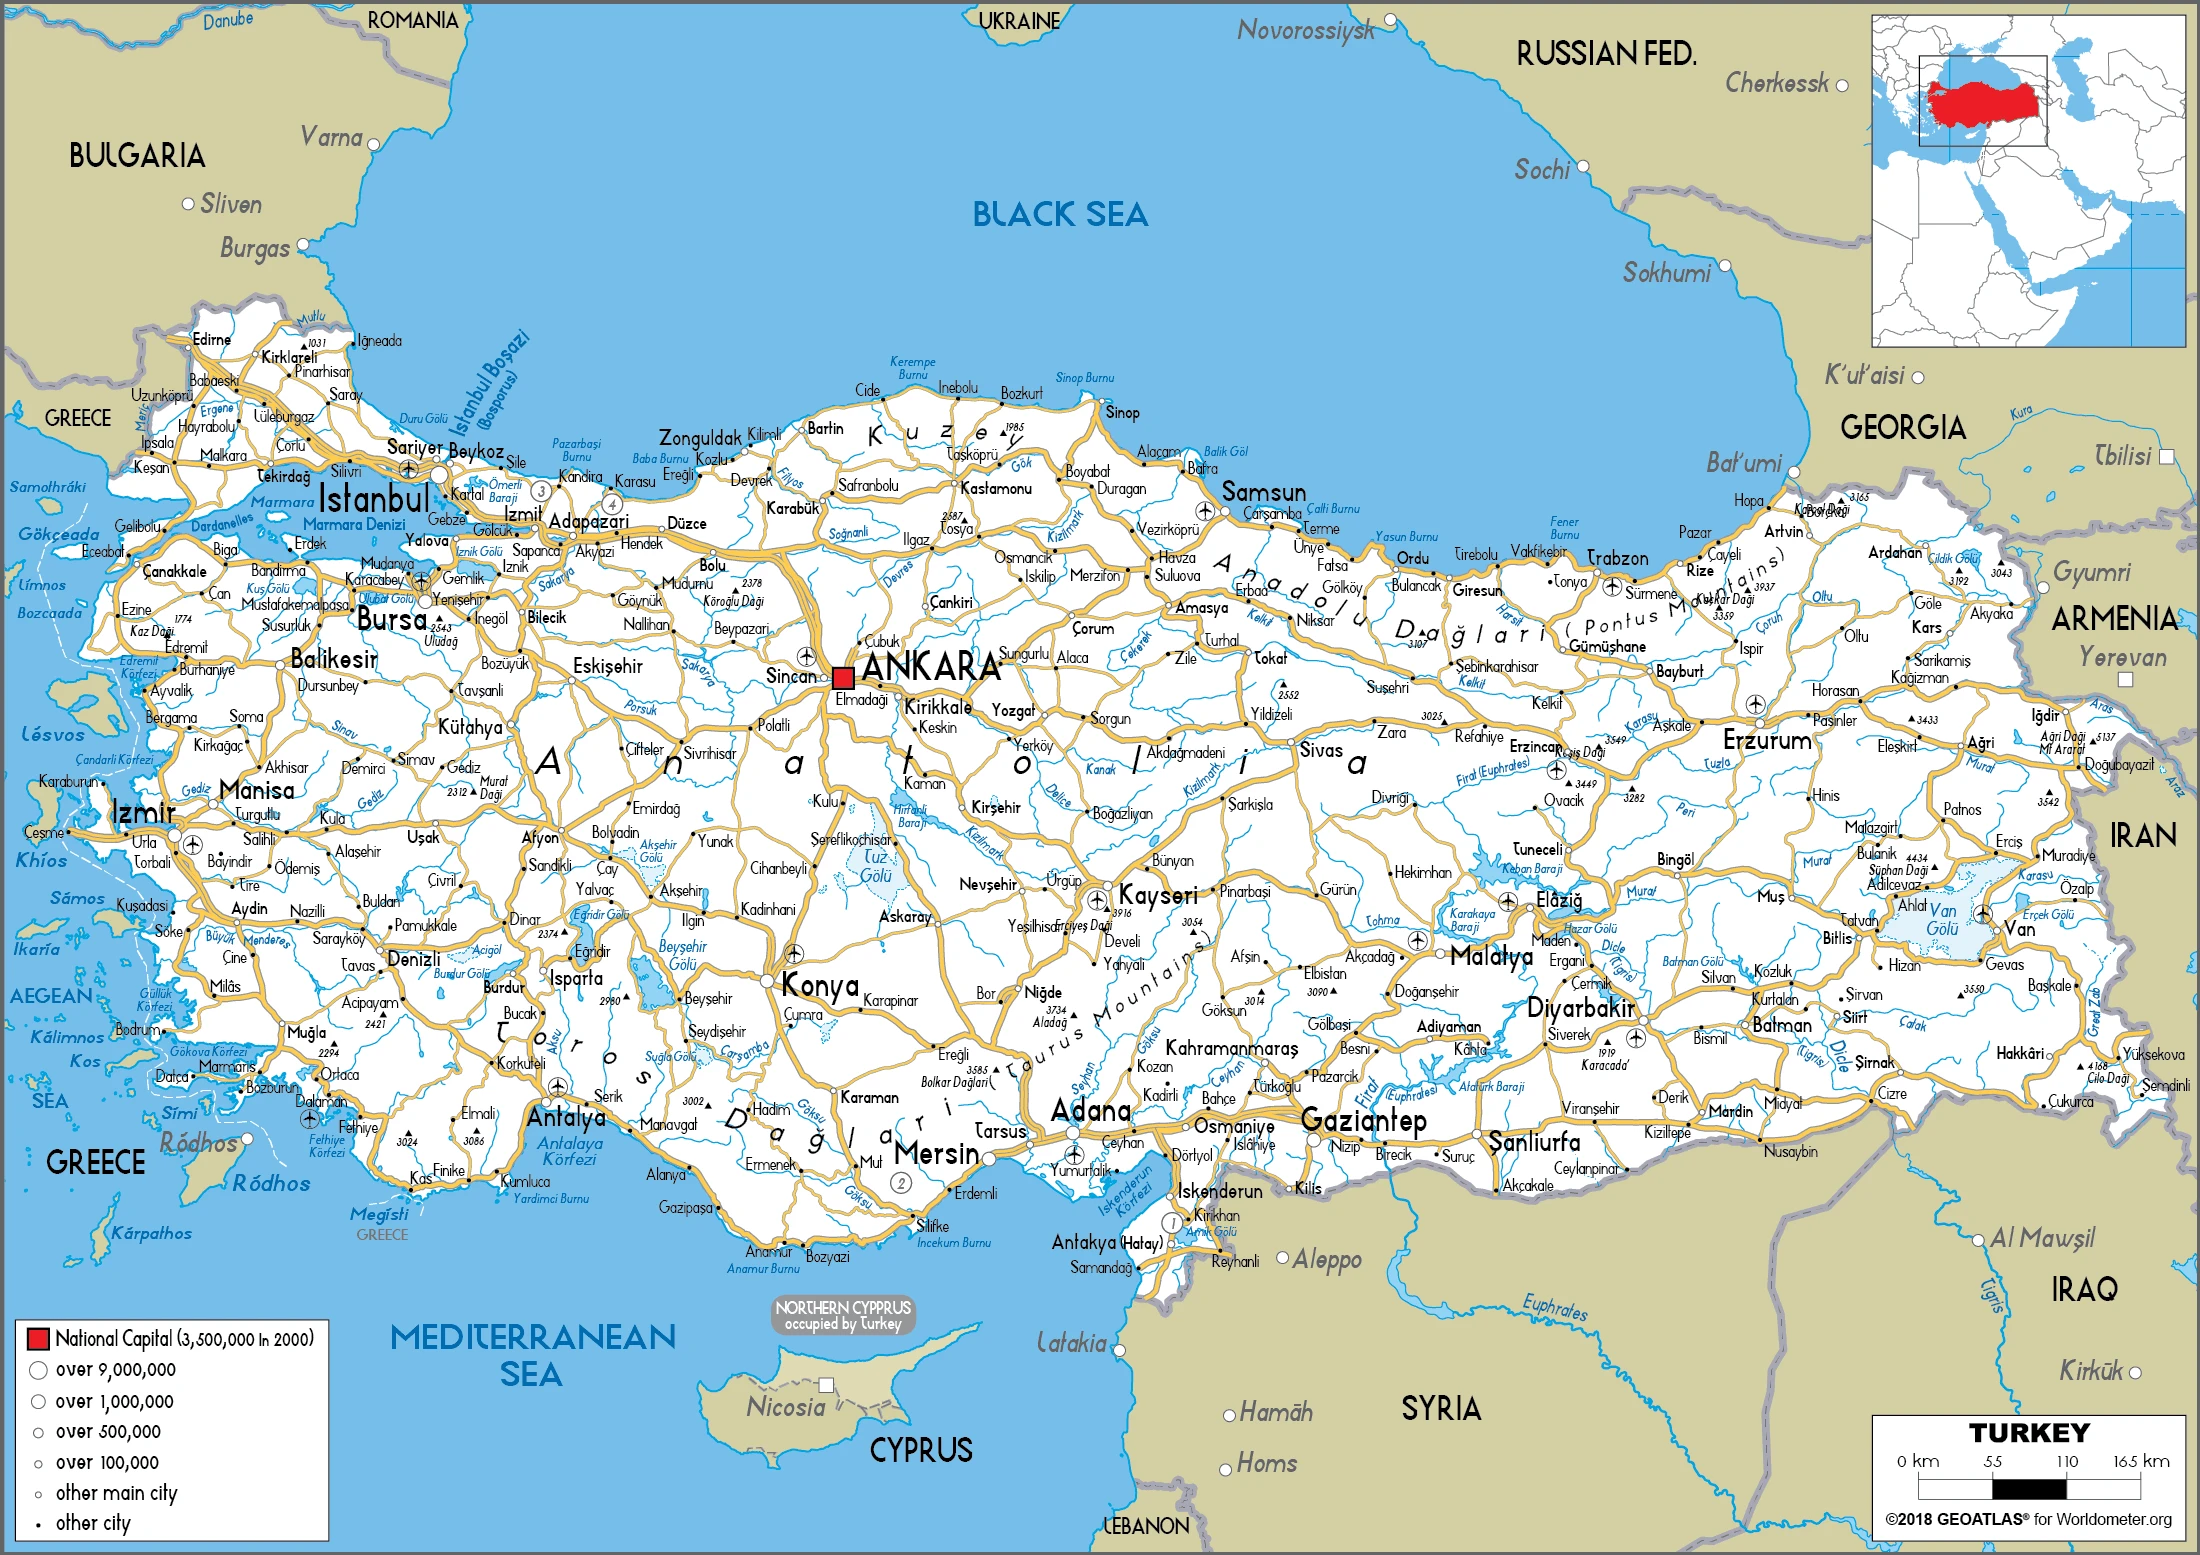 The route plan of the Turkish roadways.